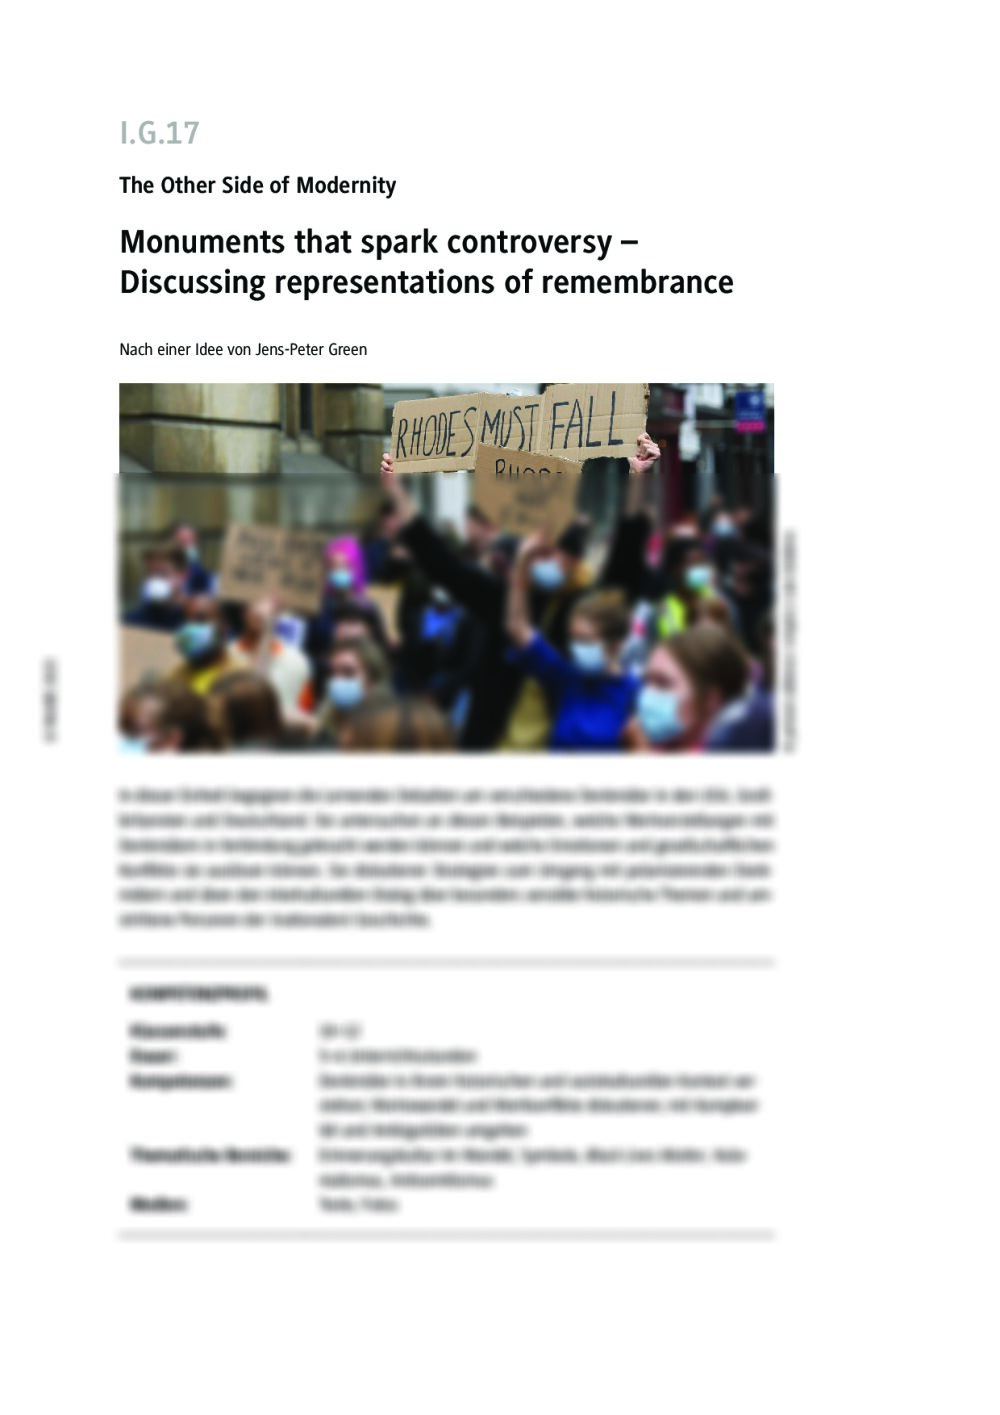 Monuments that spark controversy - Seite 1